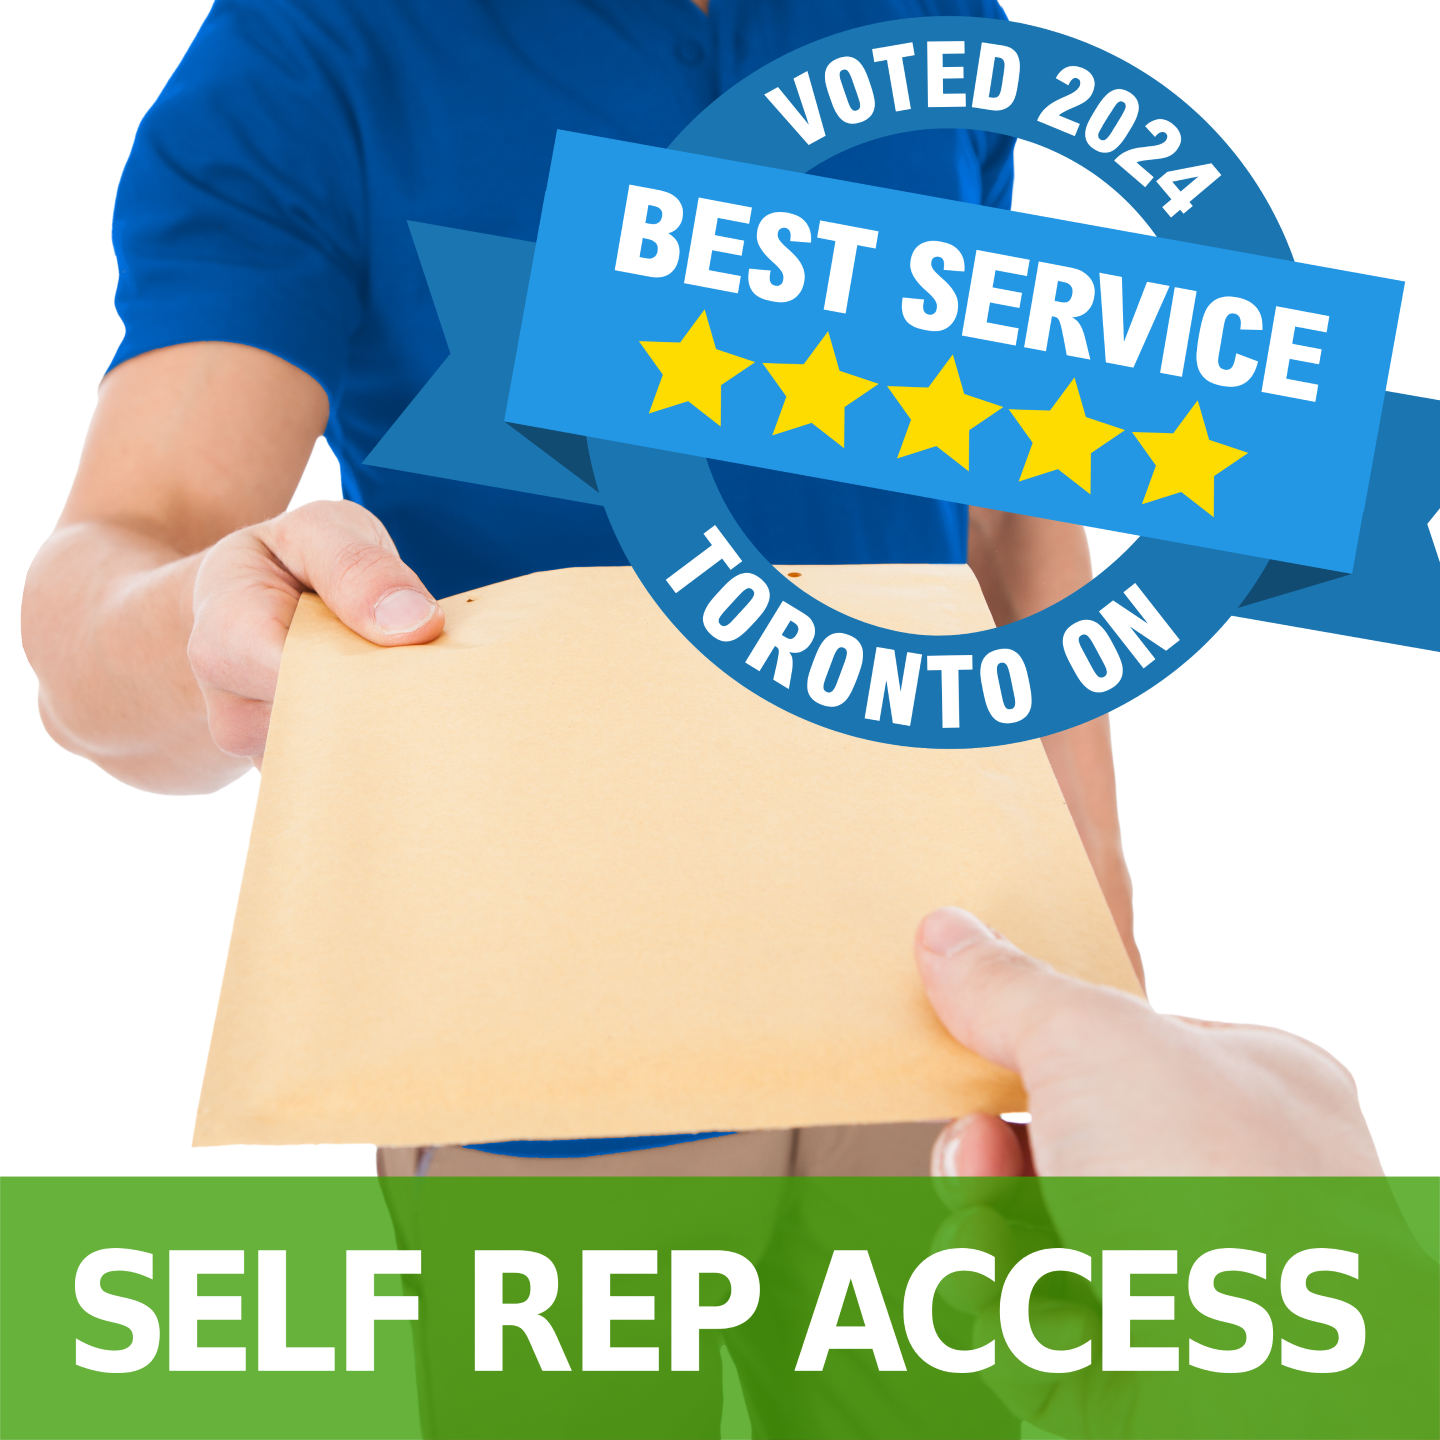 Process Server Toronto Ontario Wide Process Serving Best Service in 2024 as voted by self rep customers or self represented litigants